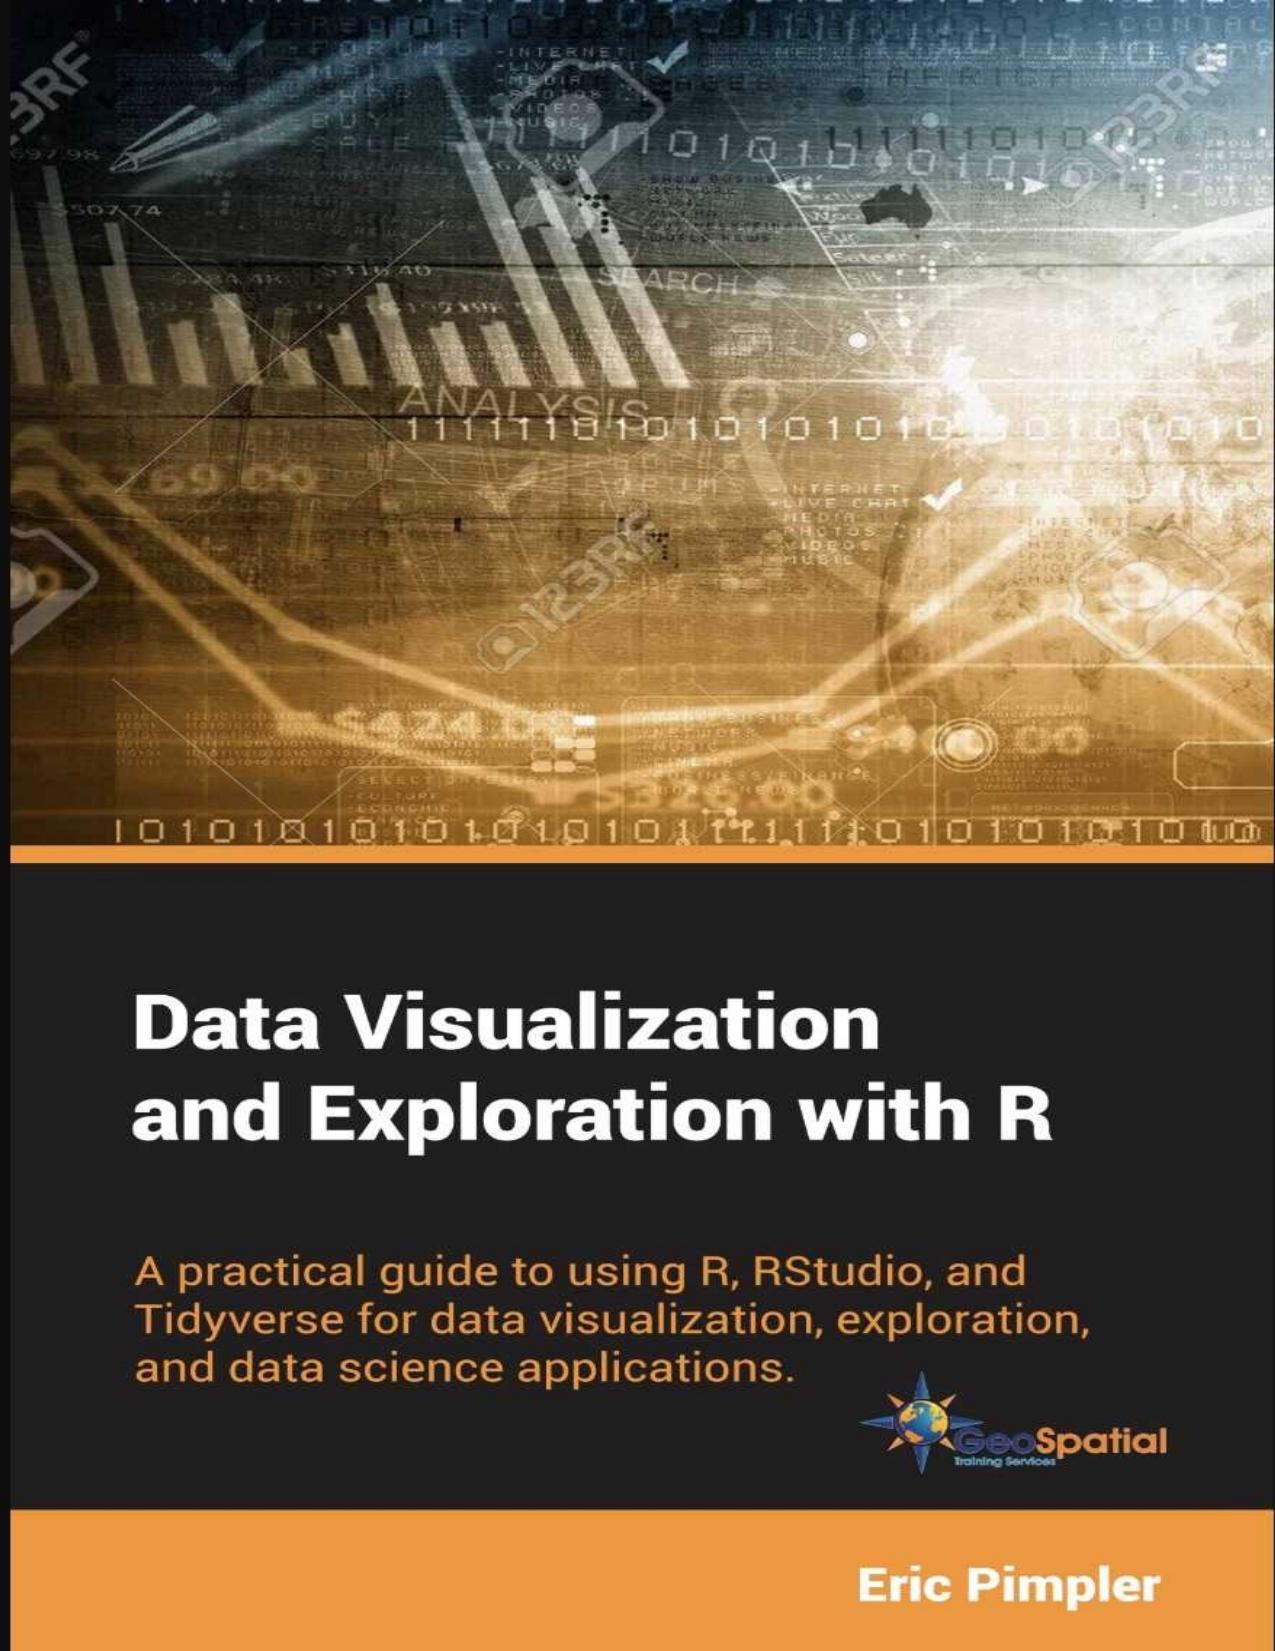 Data Visualization and Exploration with R: A practical guide to using R, RStudio, and Tidyverse for data visualization, exploration, and data science applications